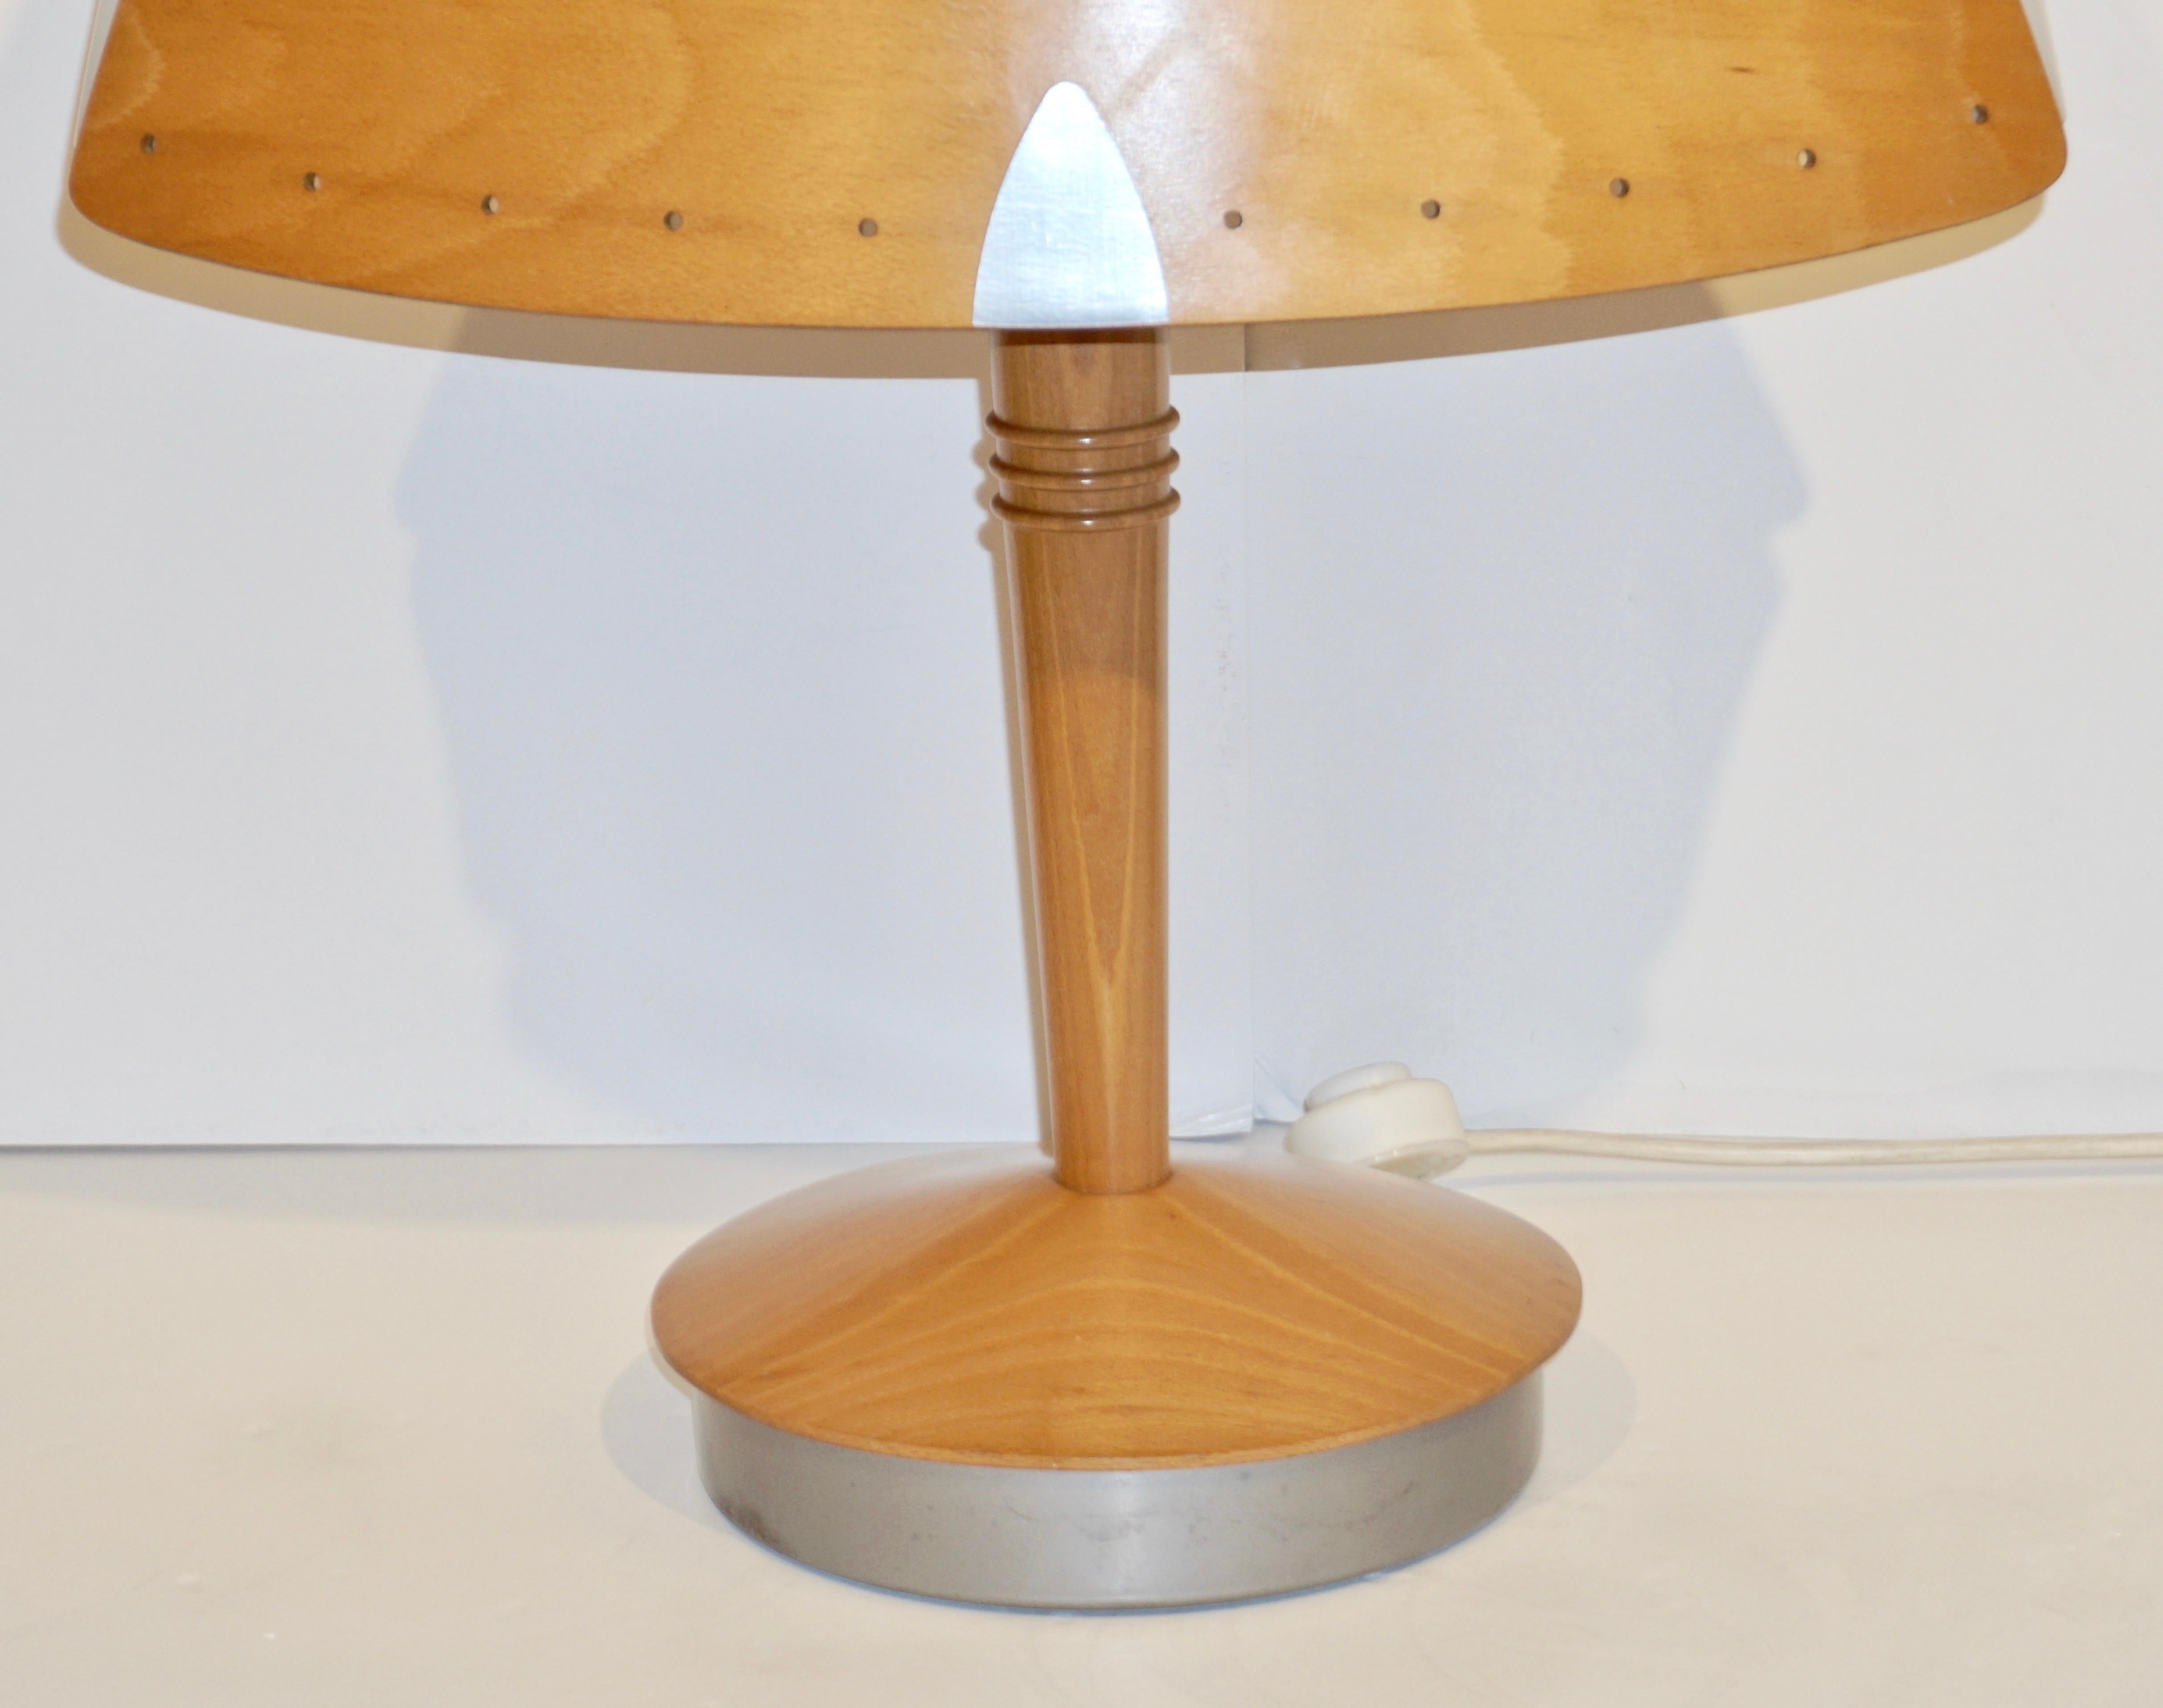 1970 French Vintage Birch Wood and Acrylic Table Lamp for Barcelona Hilton Hotel For Sale 1